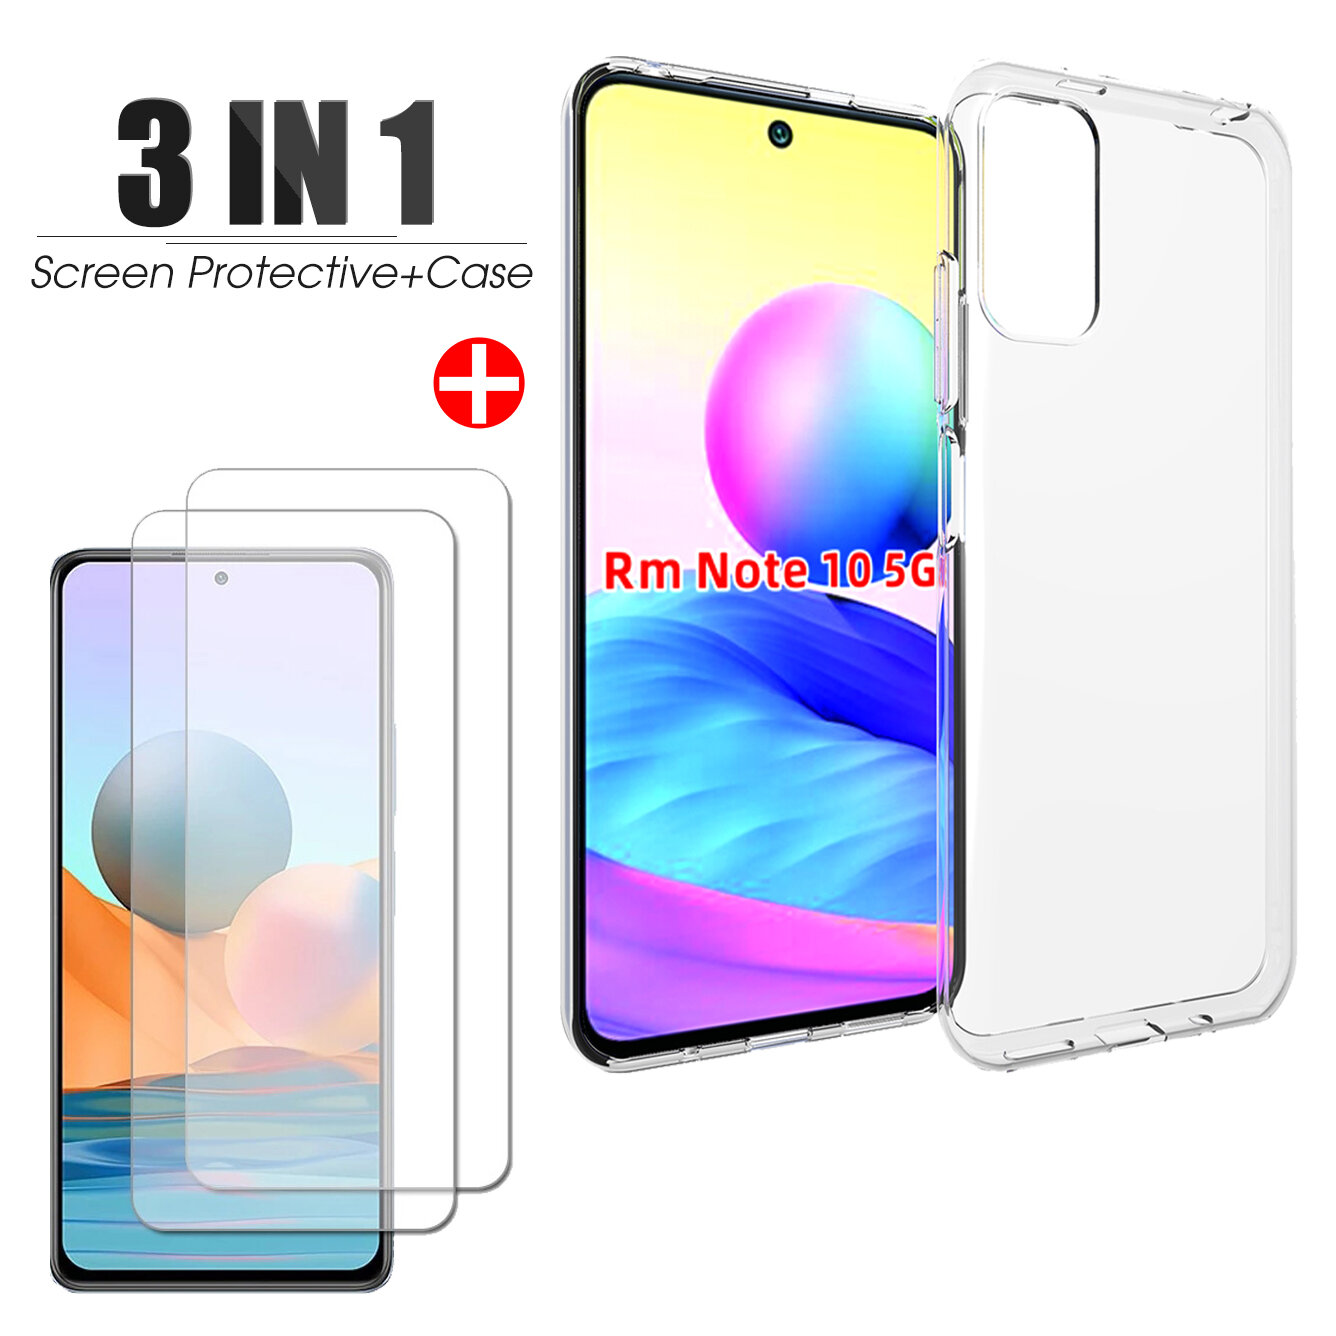 

Bakeey for POCO M3 Pro 5G NFC Global Version/ Xiaomi Redmi Note 10 5G Accessories Set Transparent Ultra-Thin Non-Yellow